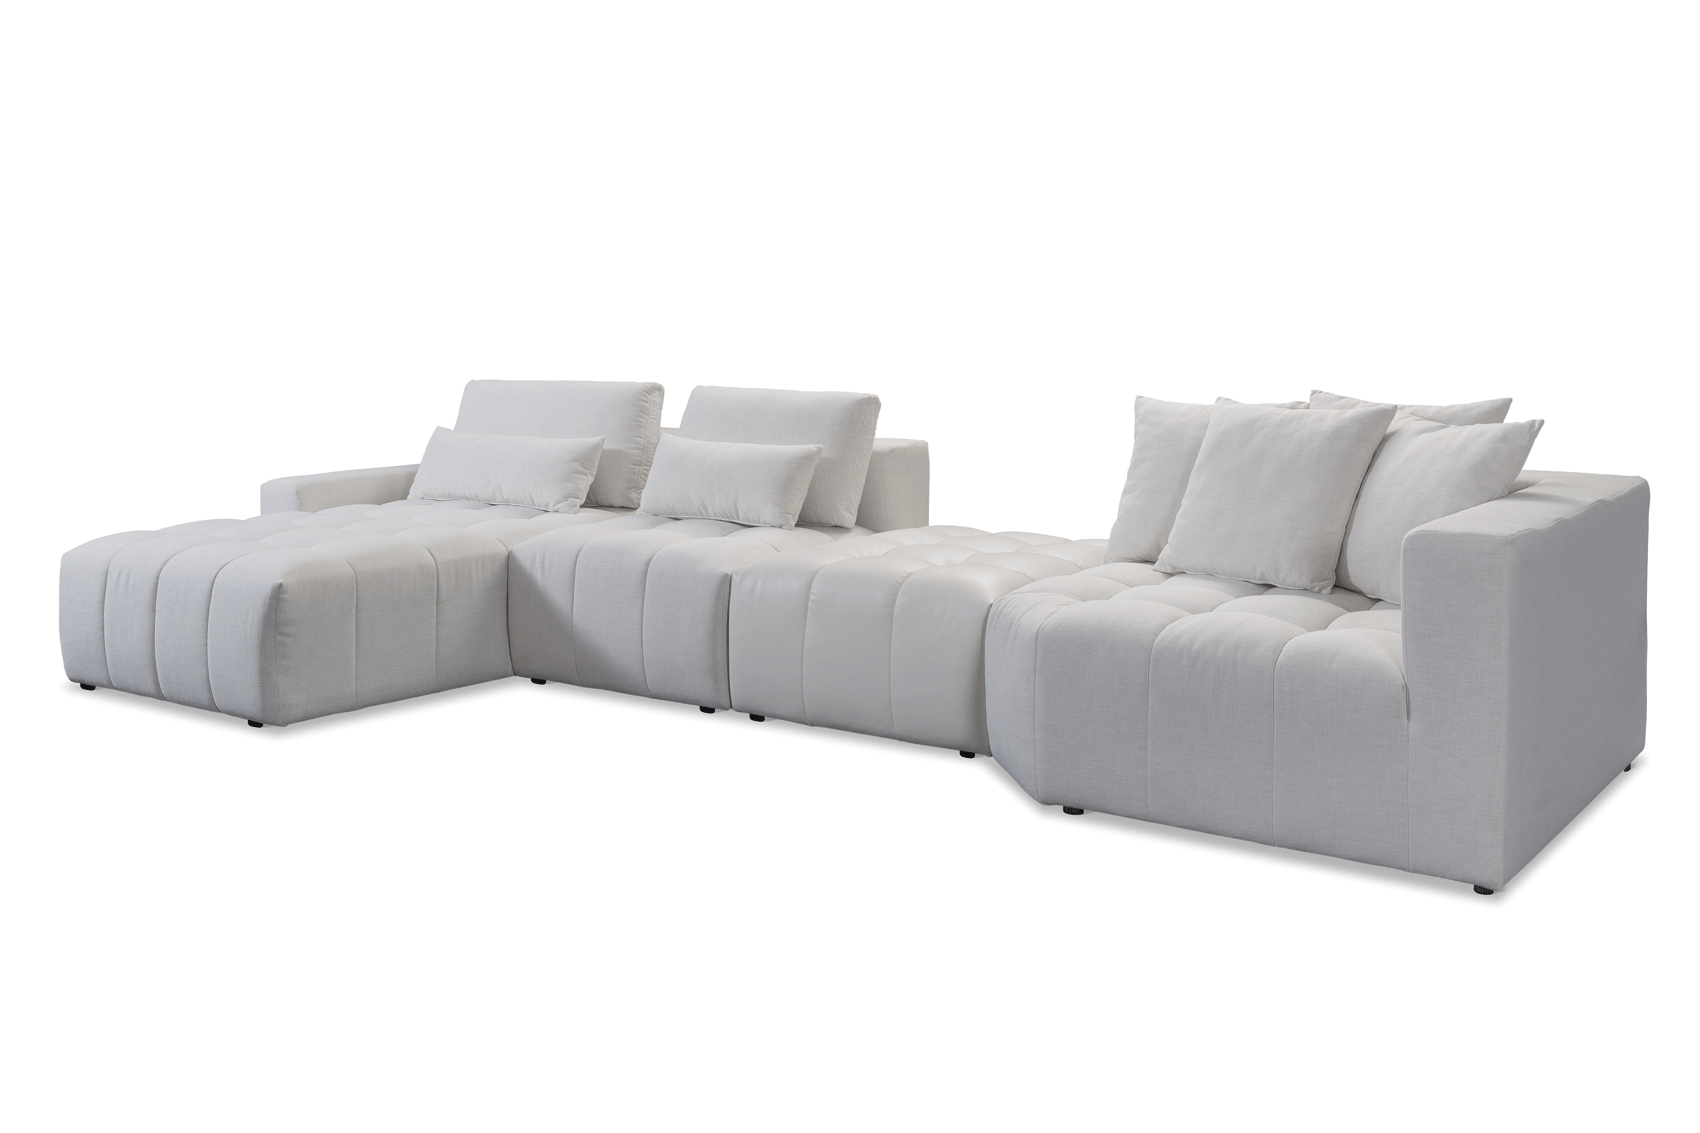 Living Room Furniture Sofas Loveseats and Chairs Sense Sectional